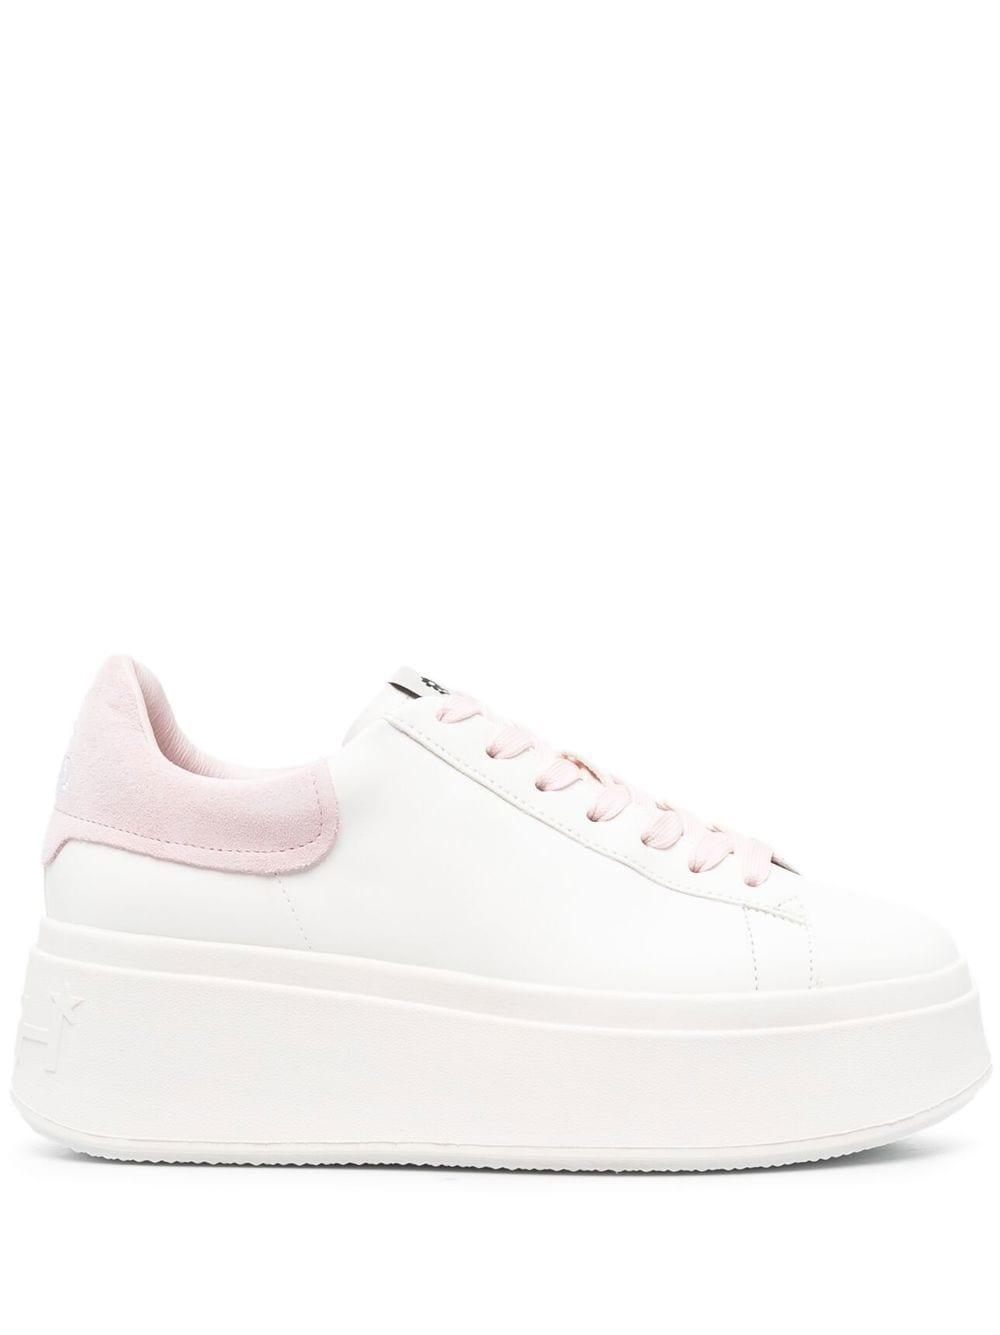 Ash Calf-leather Round-toe Sneakers in White | Lyst